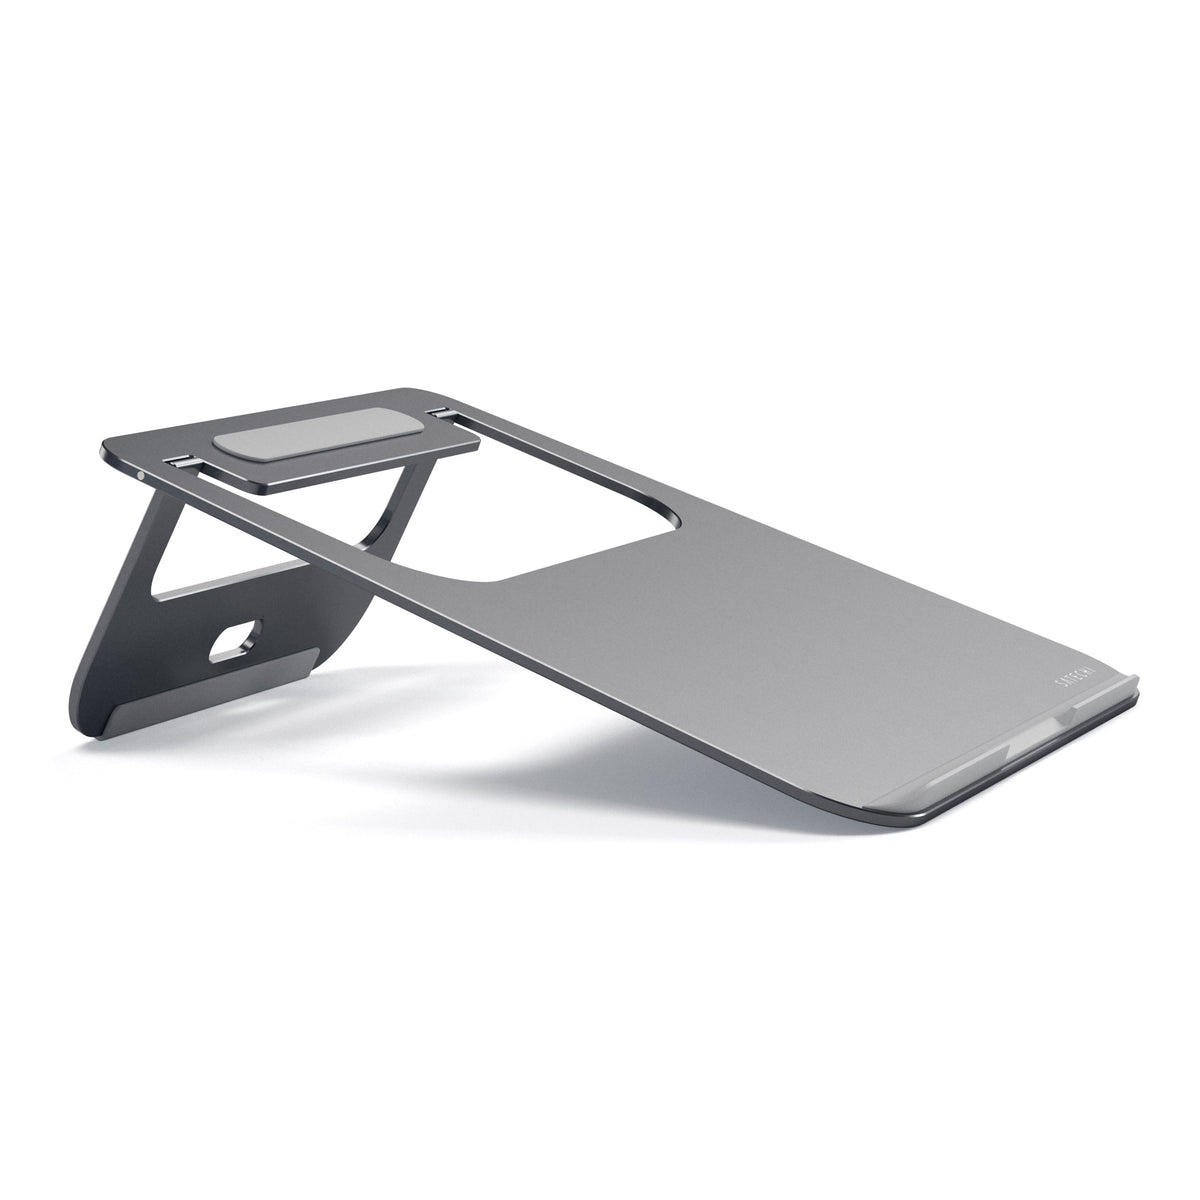 [OPEN BOX] SATECHI Aluminum Laptop Stand - Space Grey